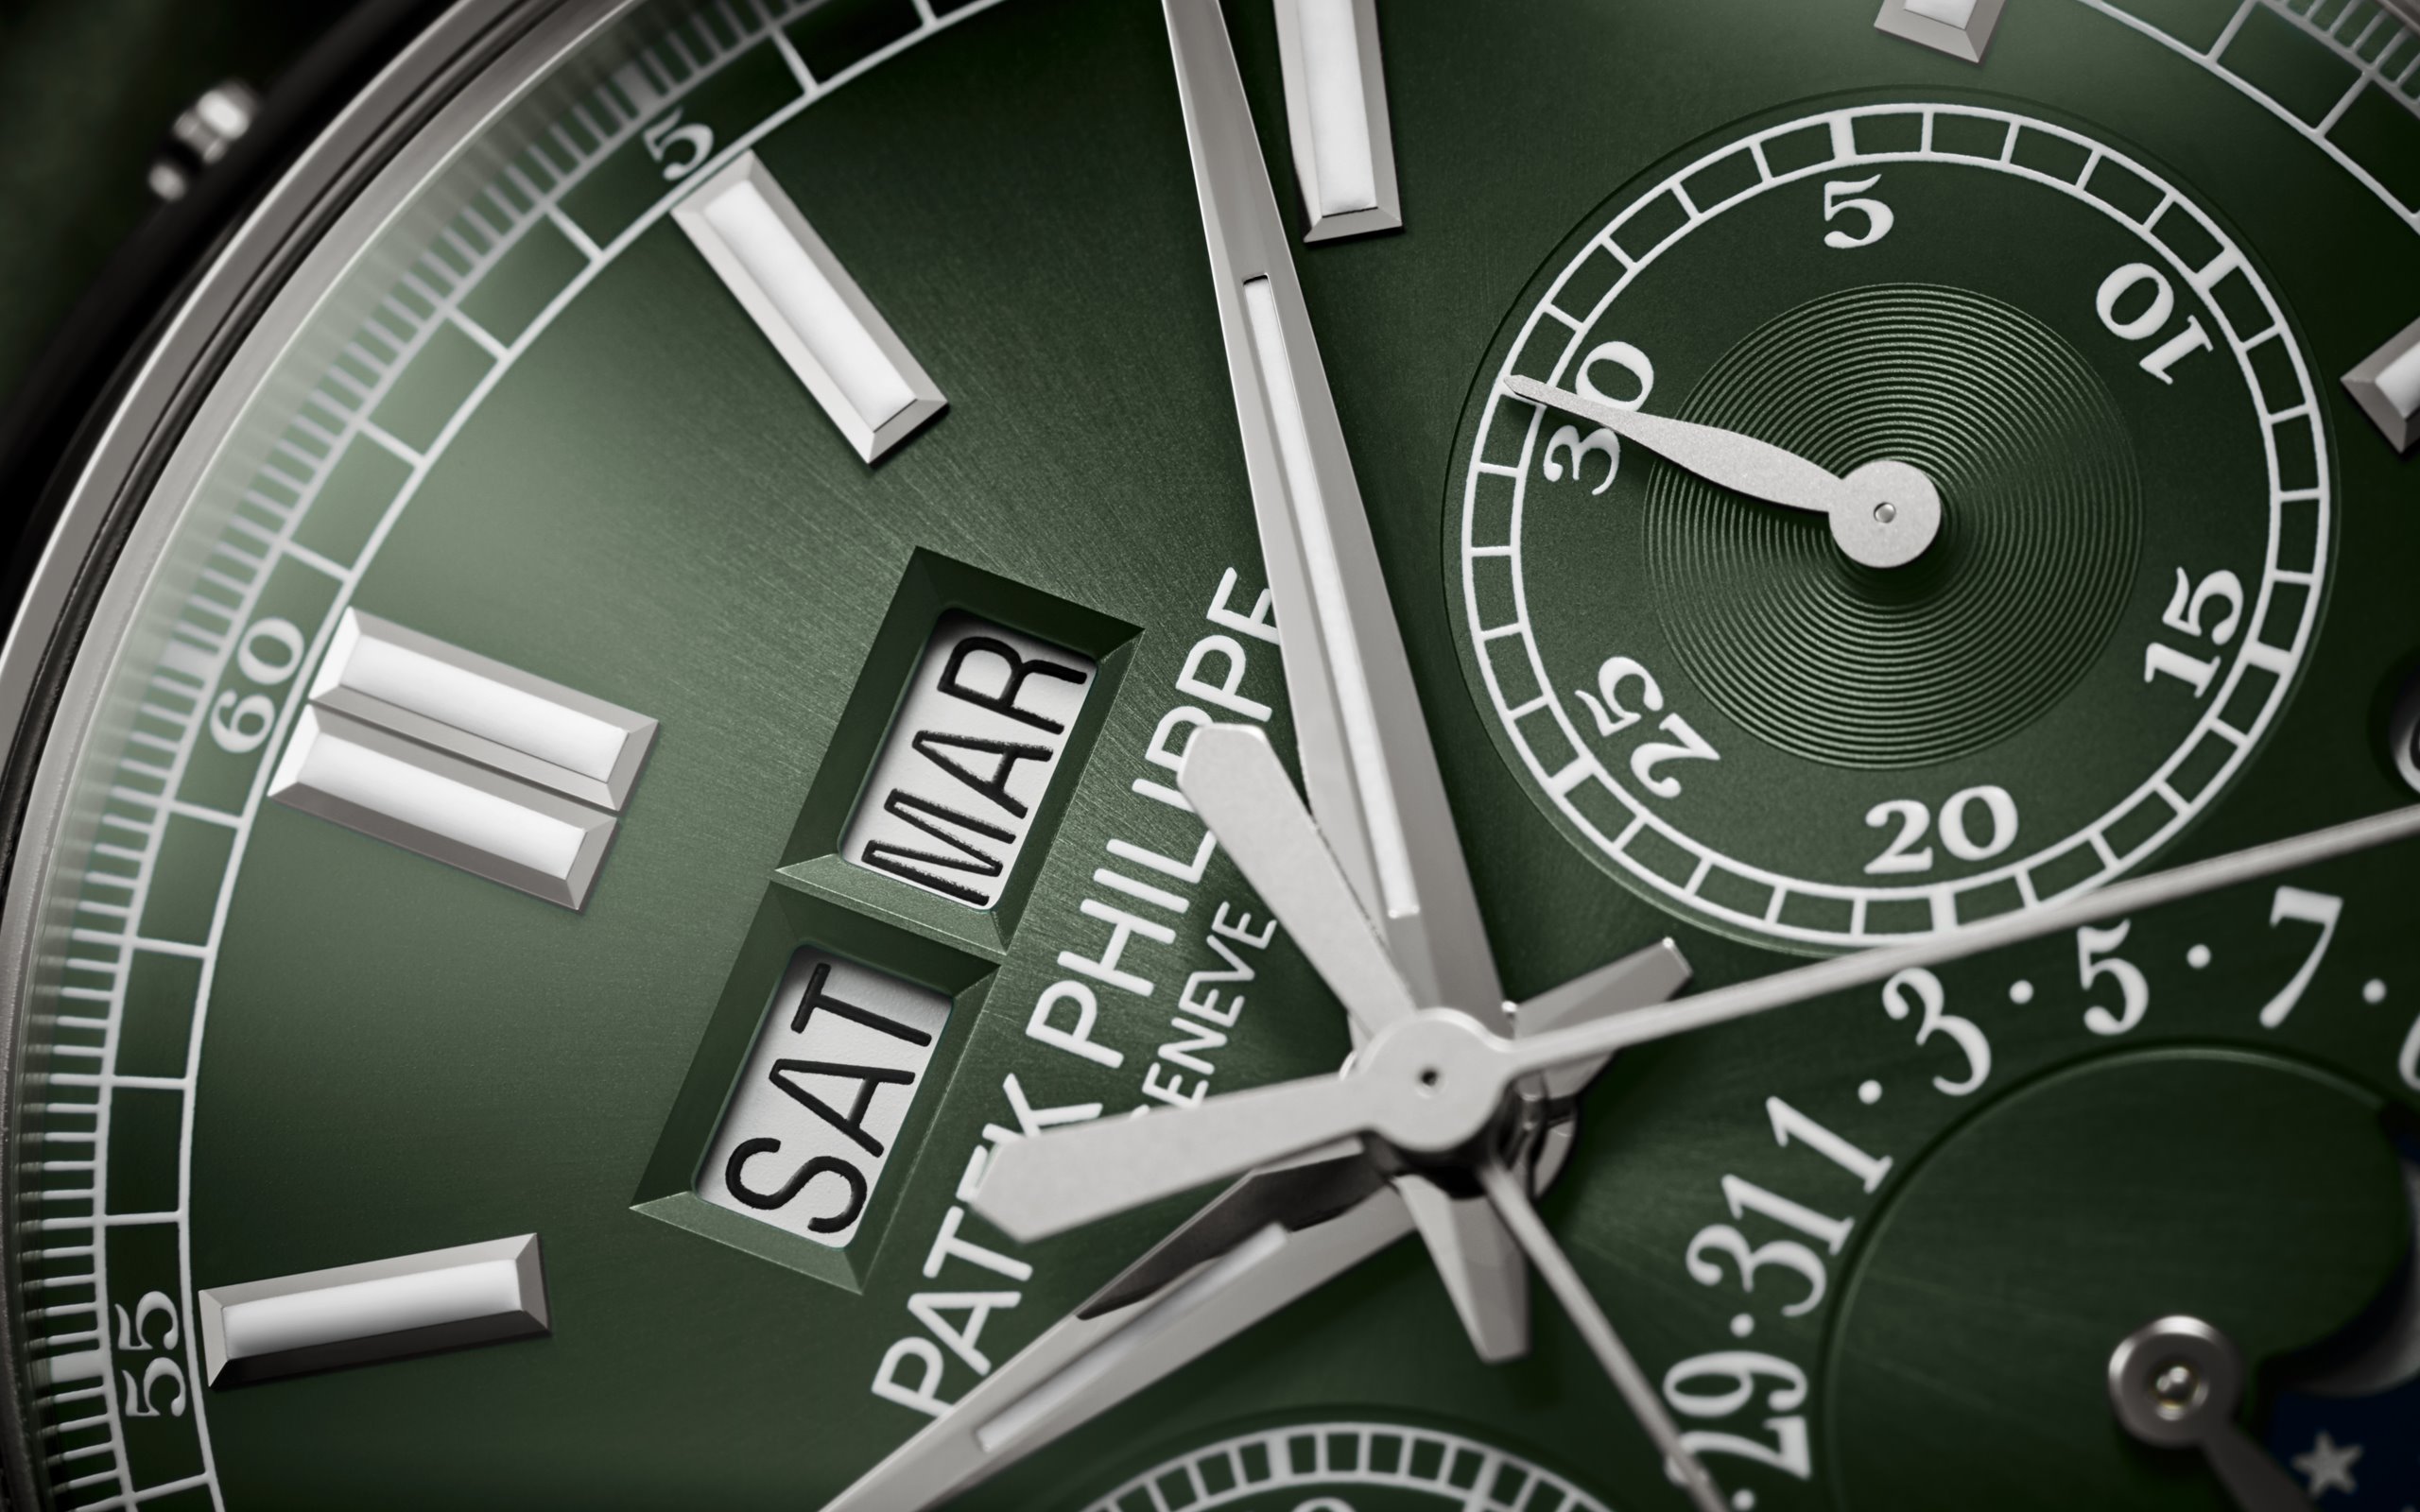 Patek Philippe Plans to Cut Global Distribution Network by 30%, Hitting the UK Market First